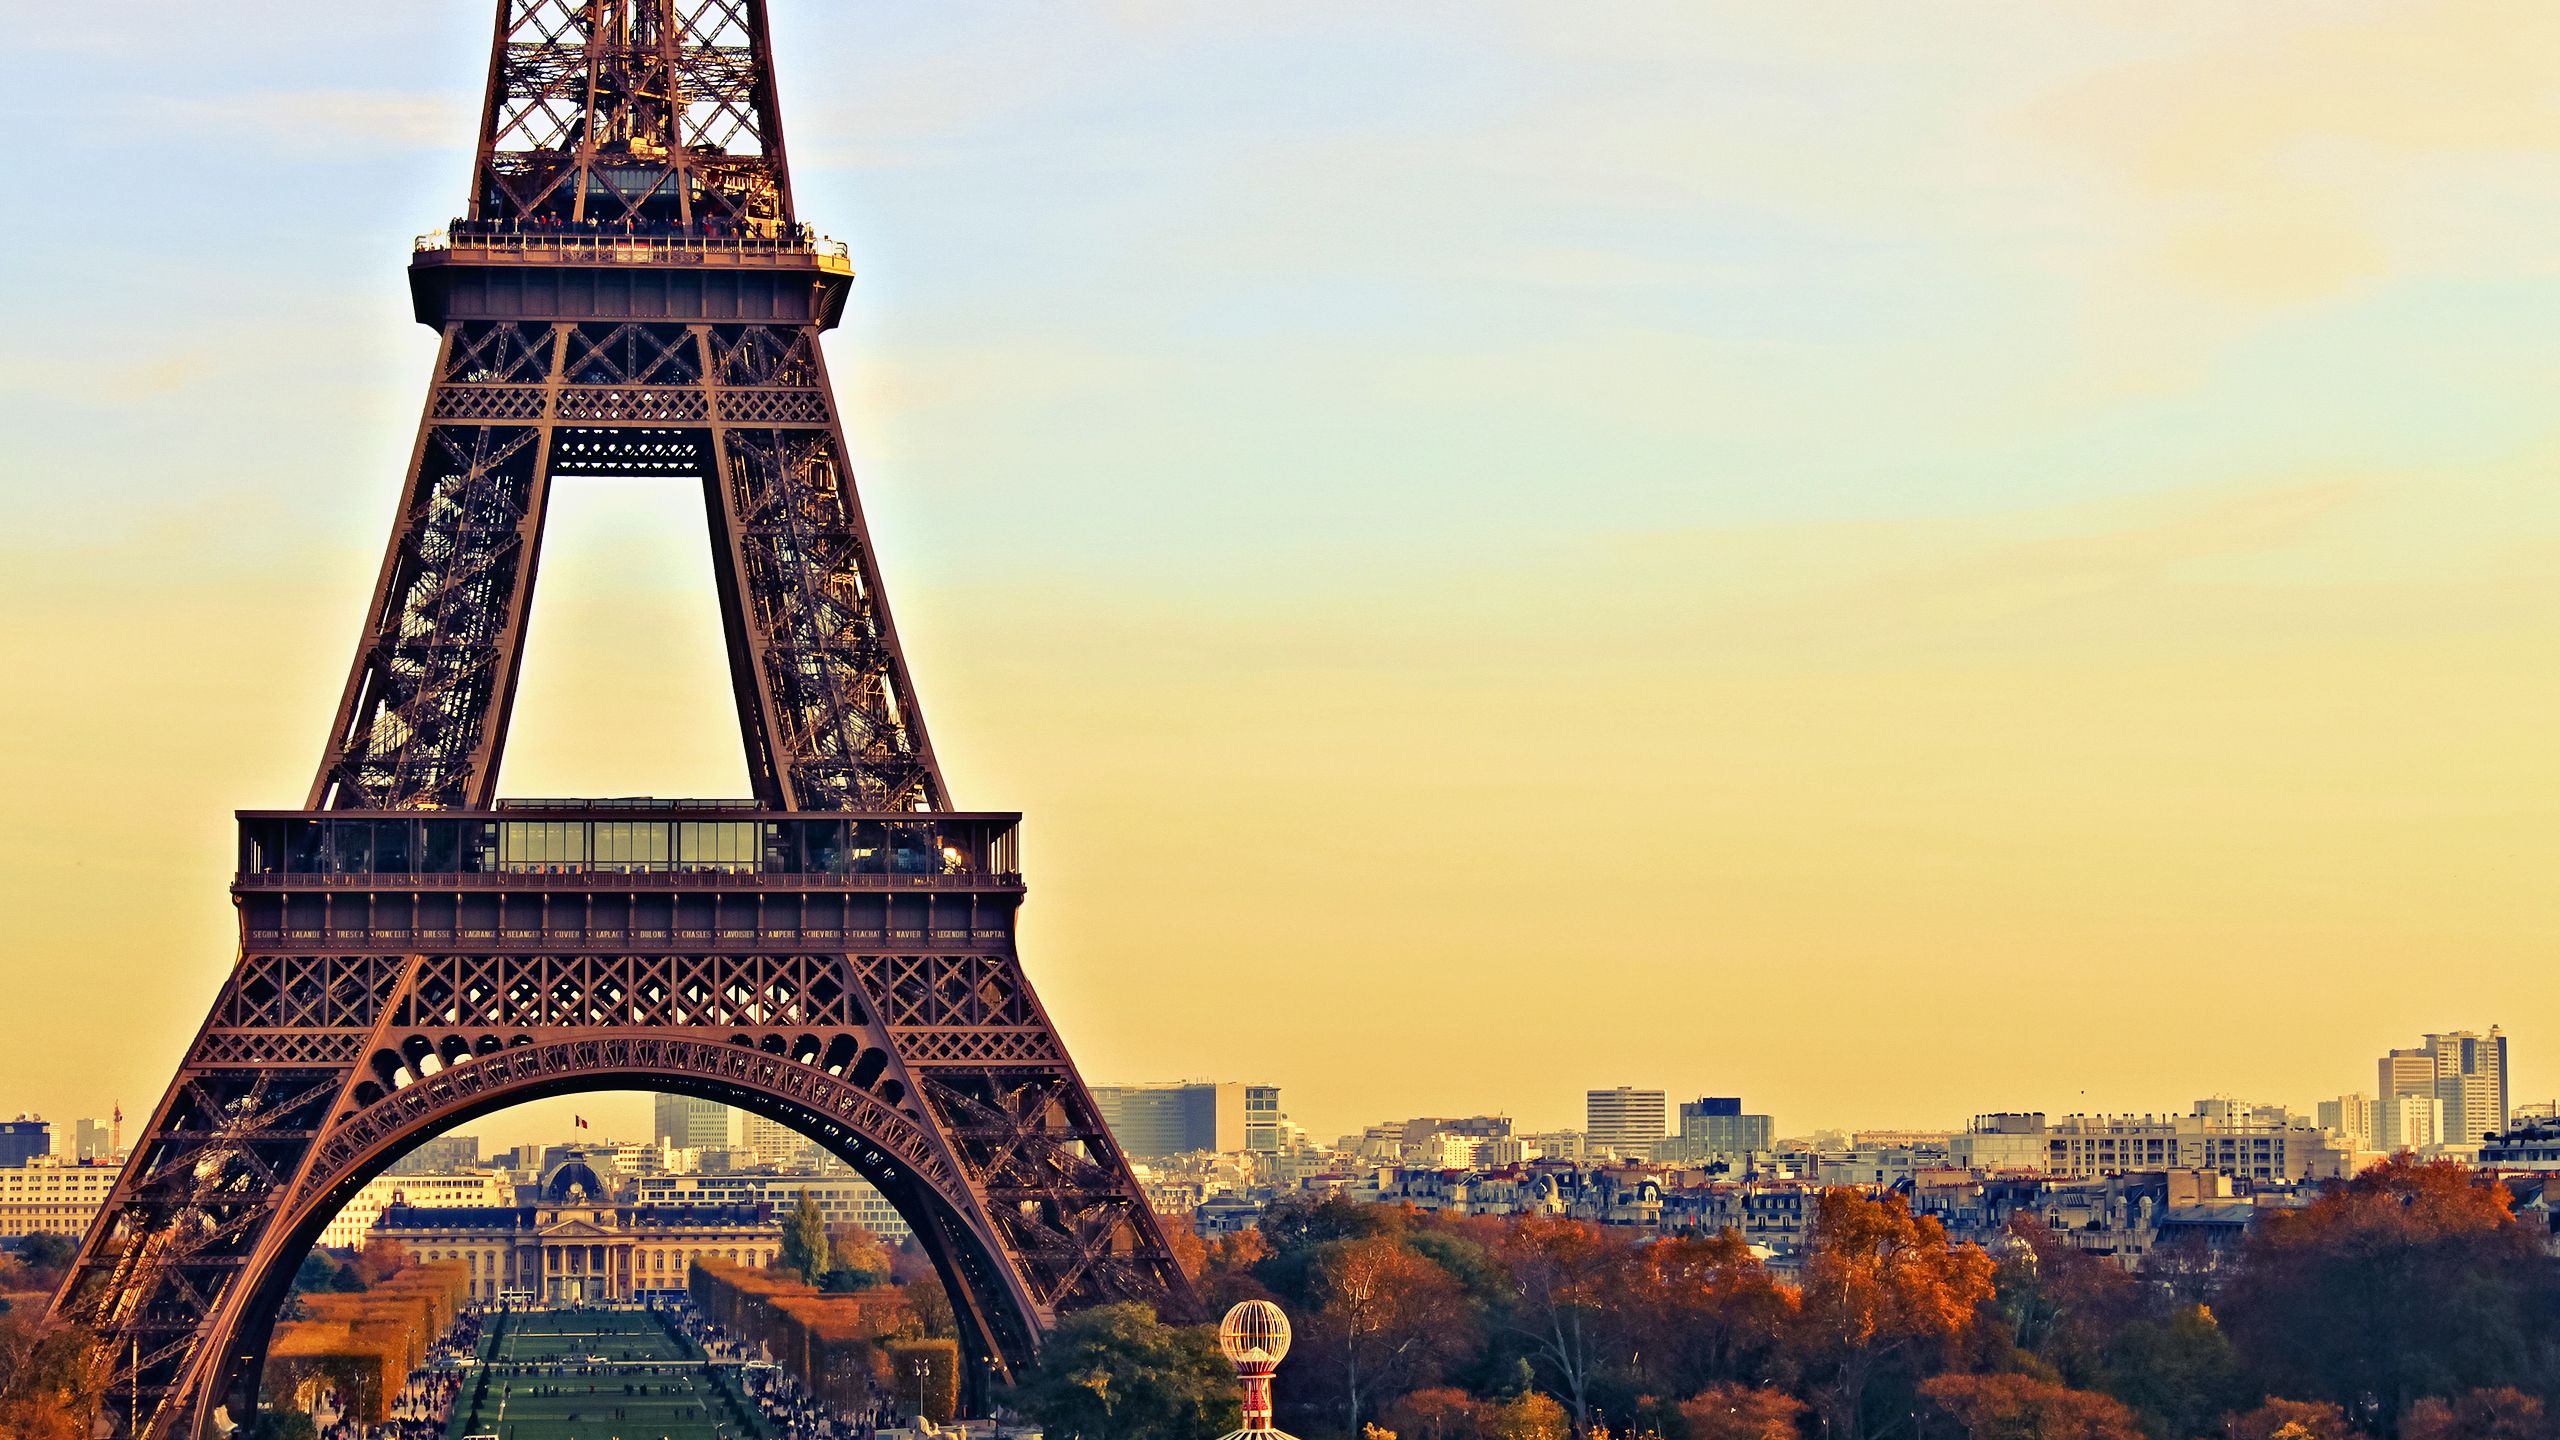 Paris City | Free Desktop Wallpapers for Widescreen, HD and Mobile